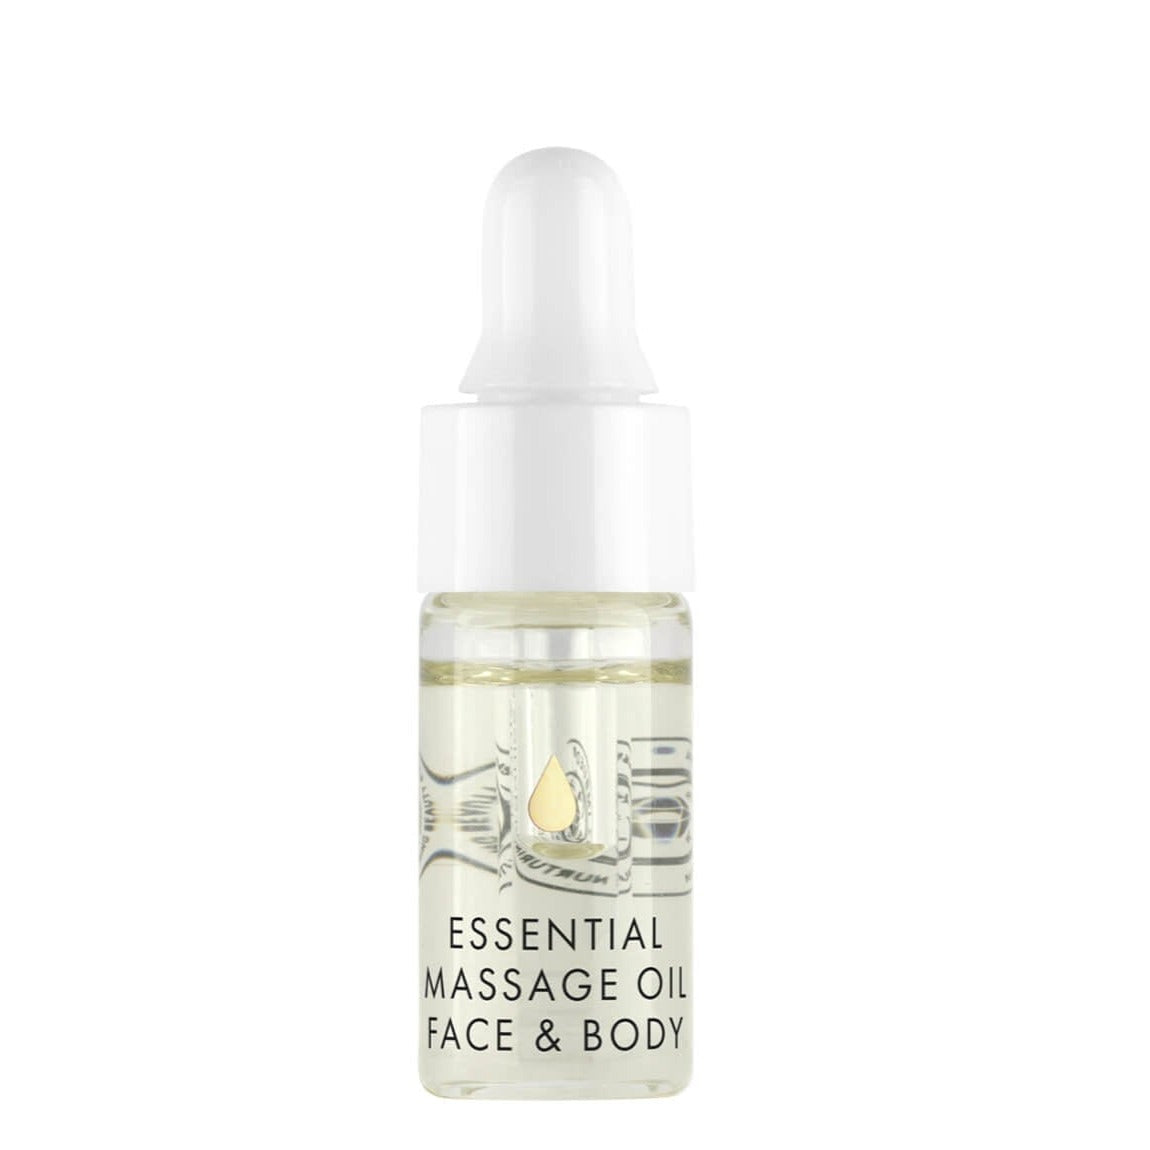 Essential Massage Oil for Face & Body - Unscented Sample Other Synthesis Organics 3ml